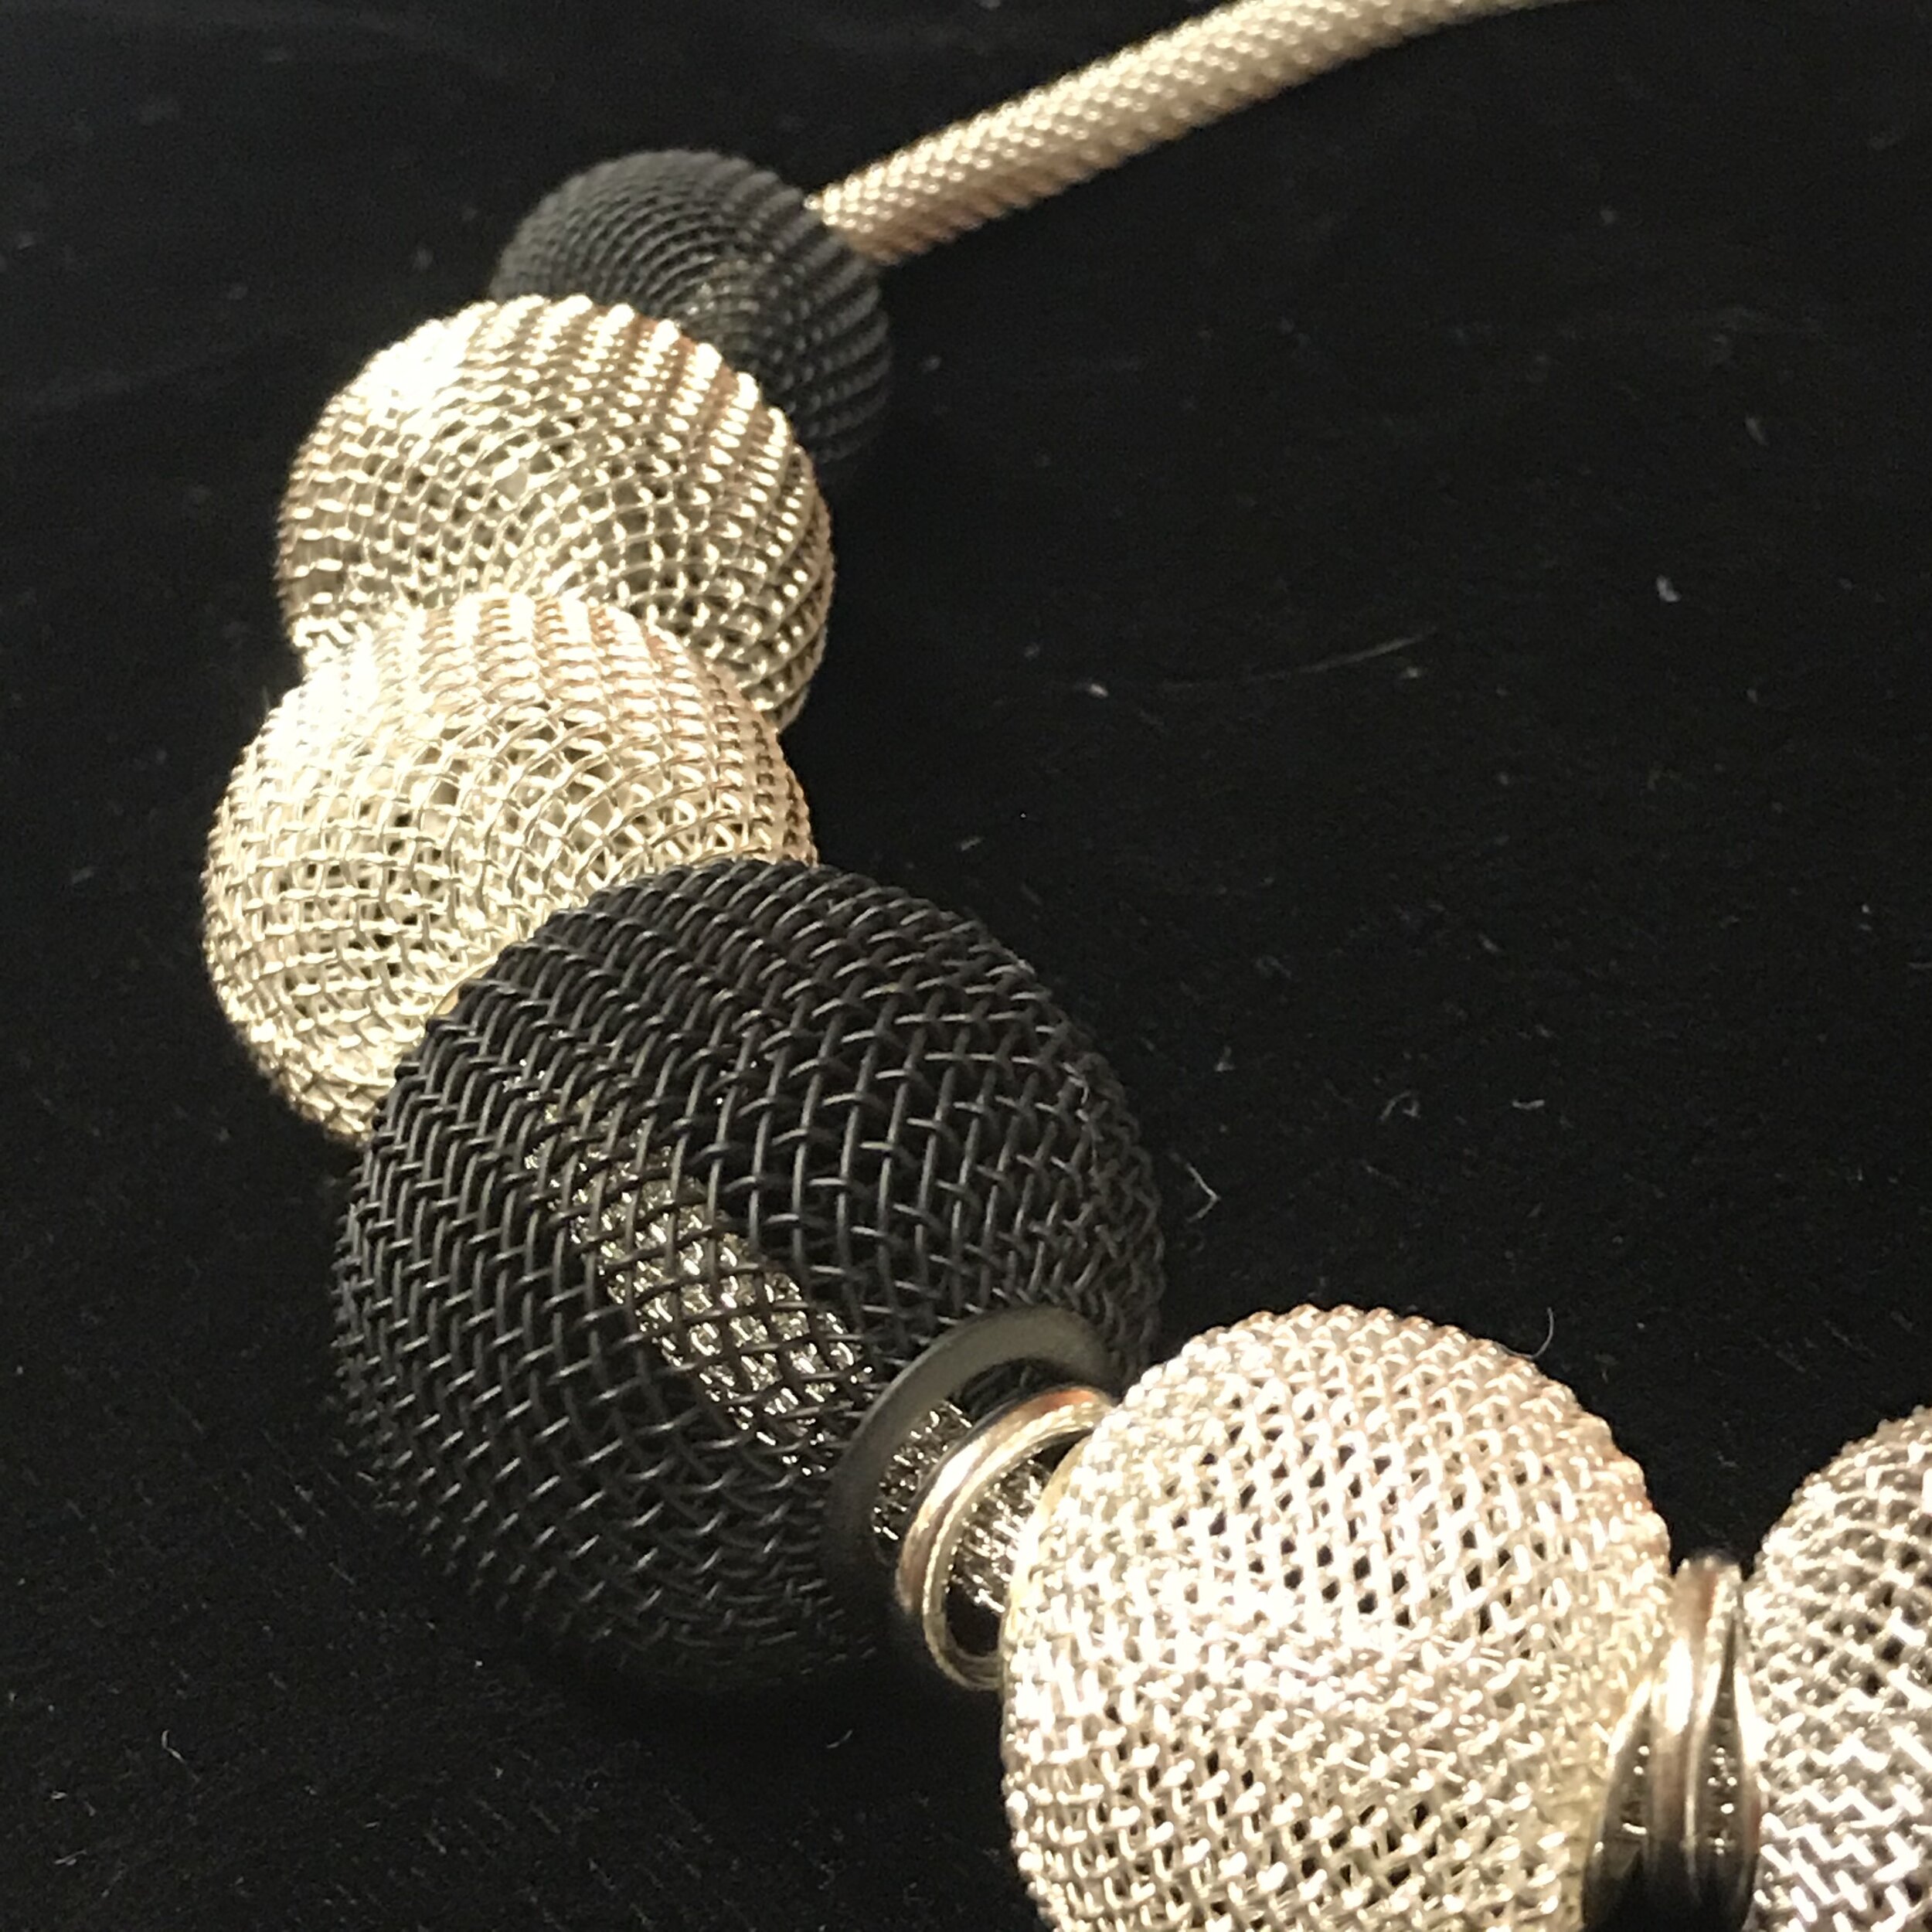 Gold Mesh Necklace with Magnetic Ball Clasp